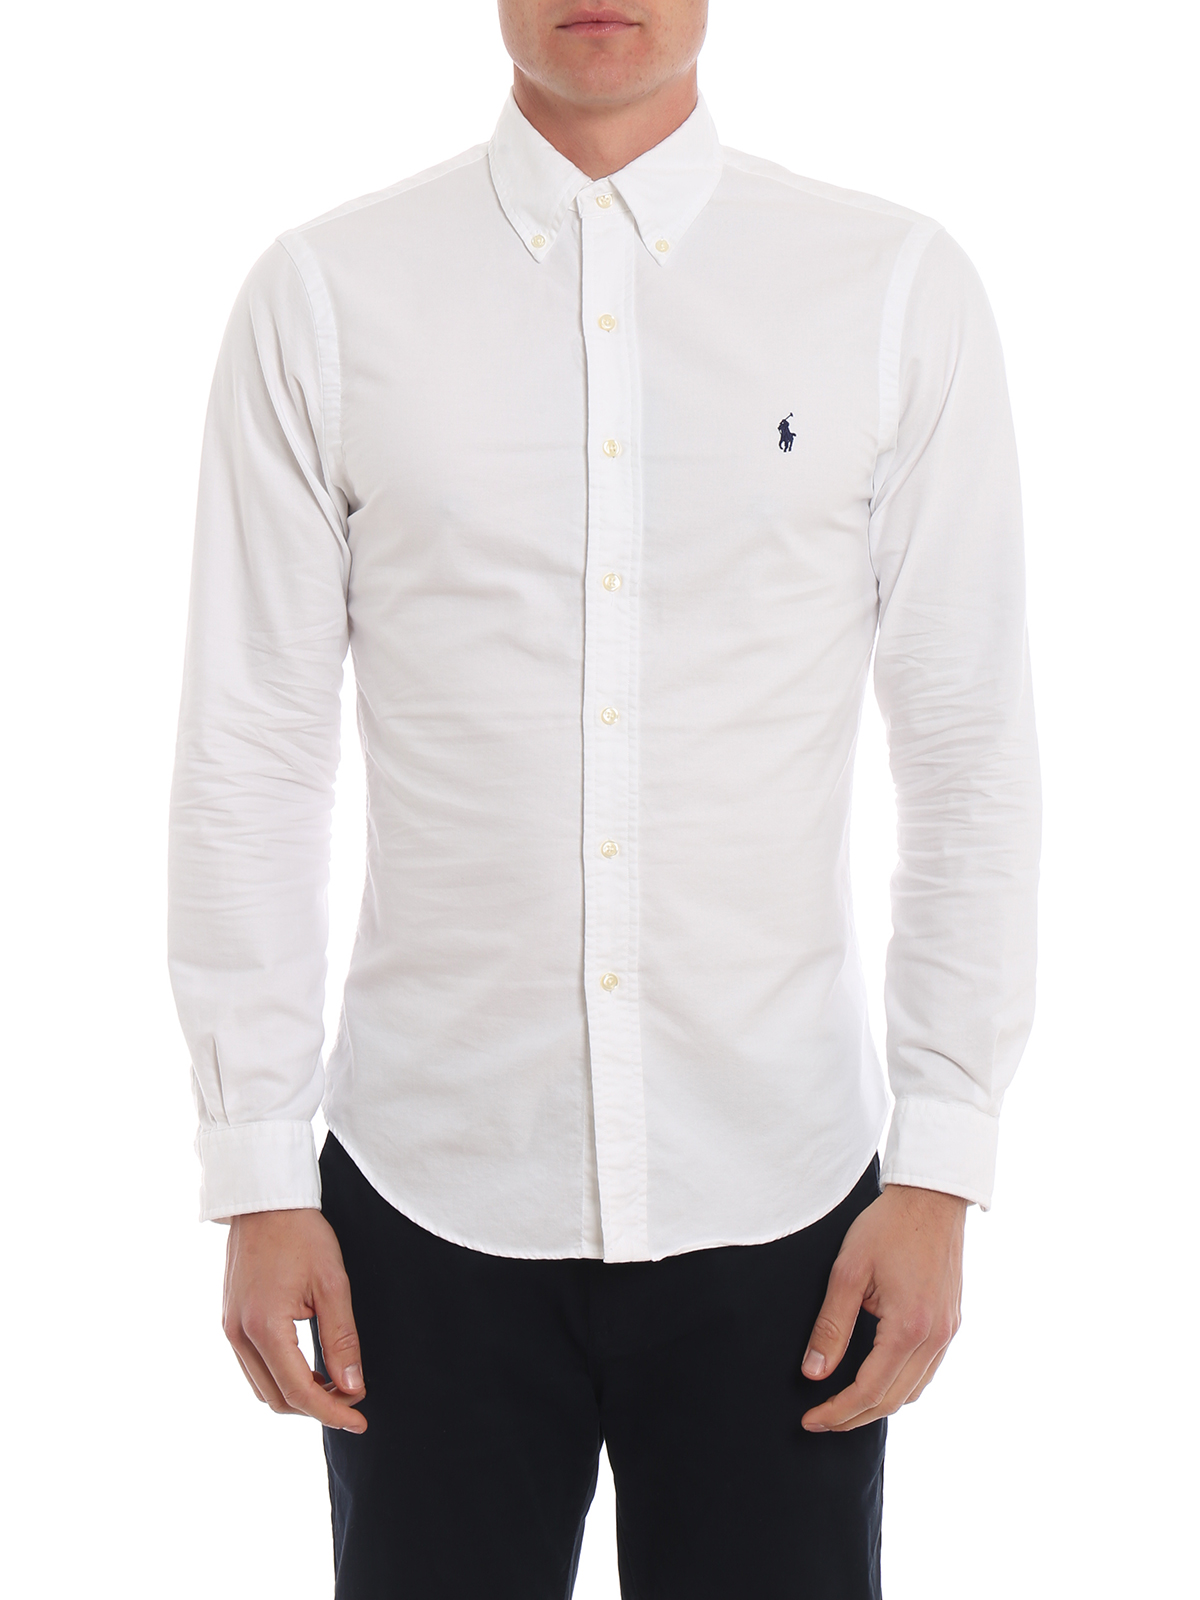 Camisas Polo Ralph - Oxford - 710736557002 | THEBS [iKRIX]